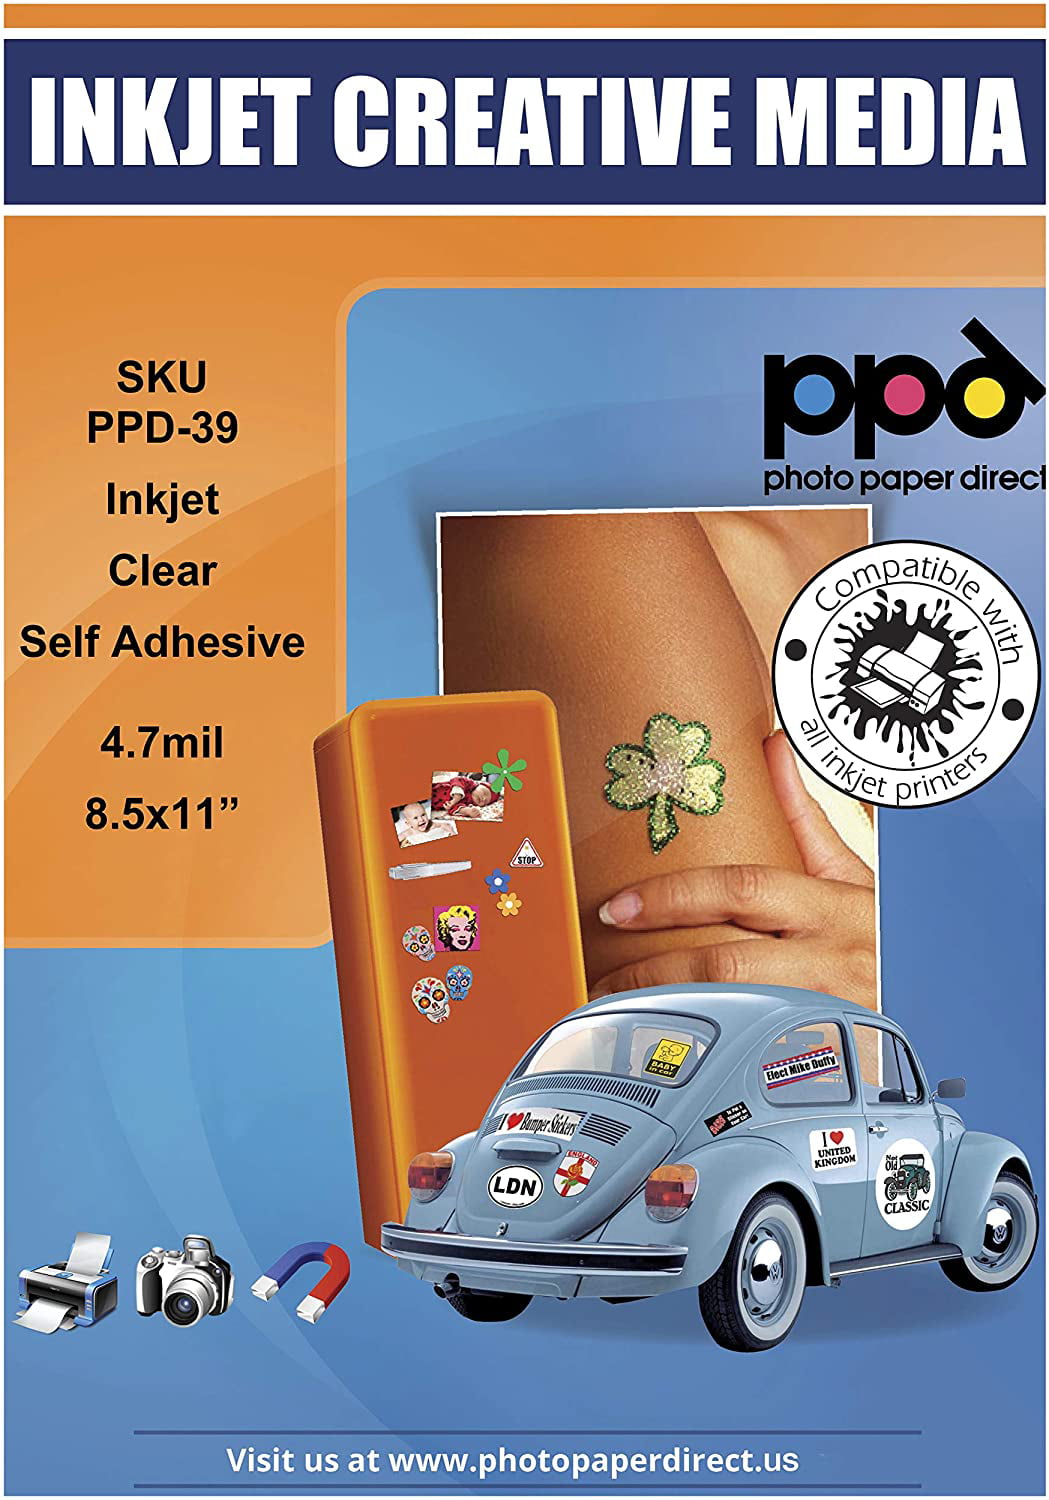 PPD-39-10 PPD Inkjet Clear Creative Self Adhesive Sticker LTR 8.5x11 x 10 Sheets 